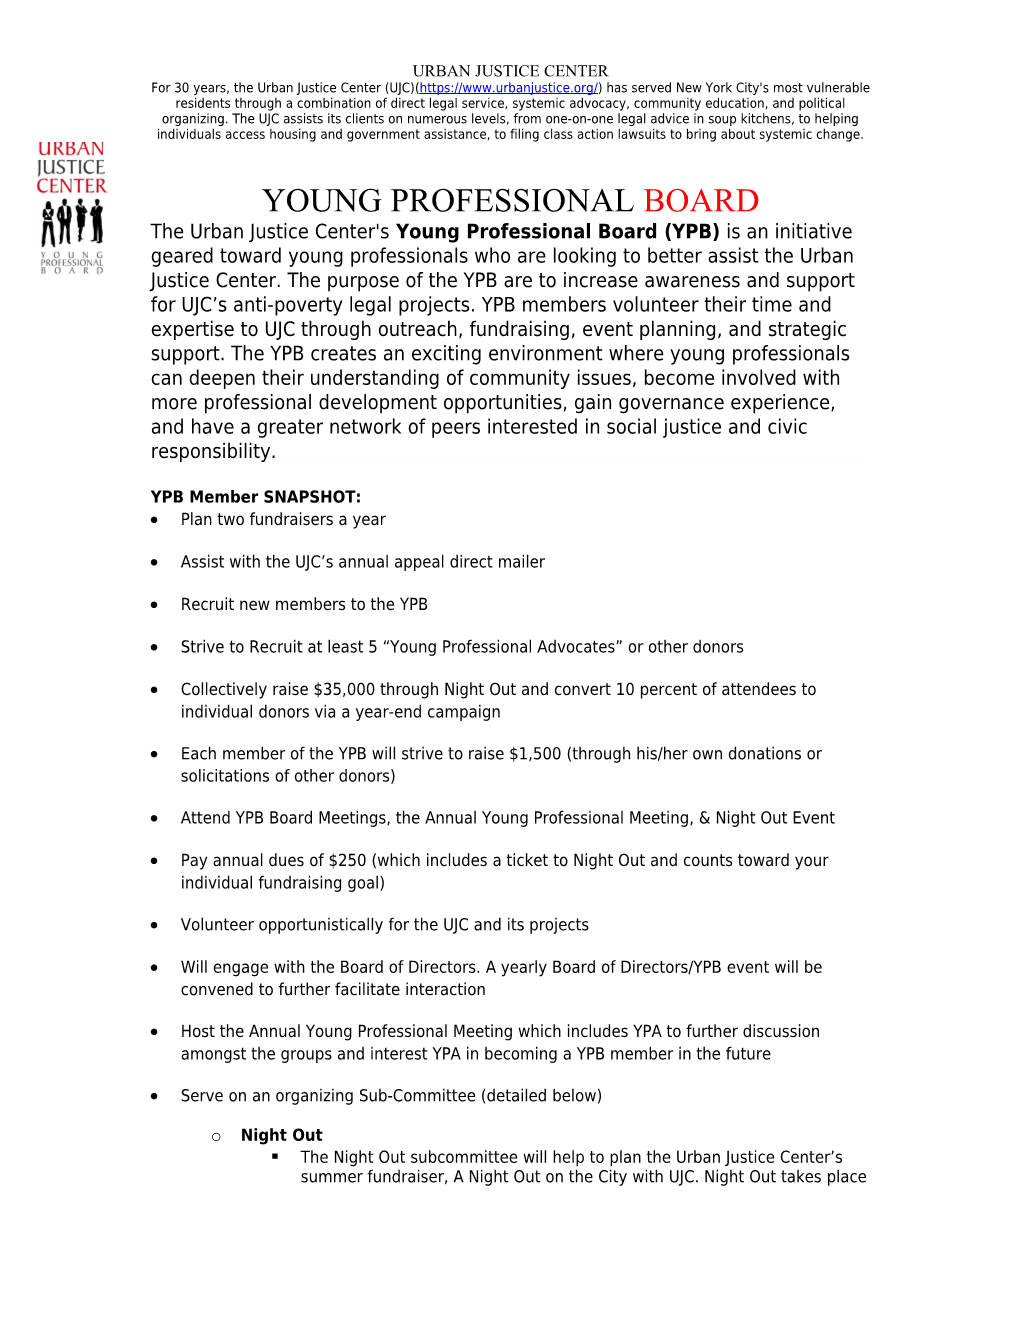 Young Professional Board